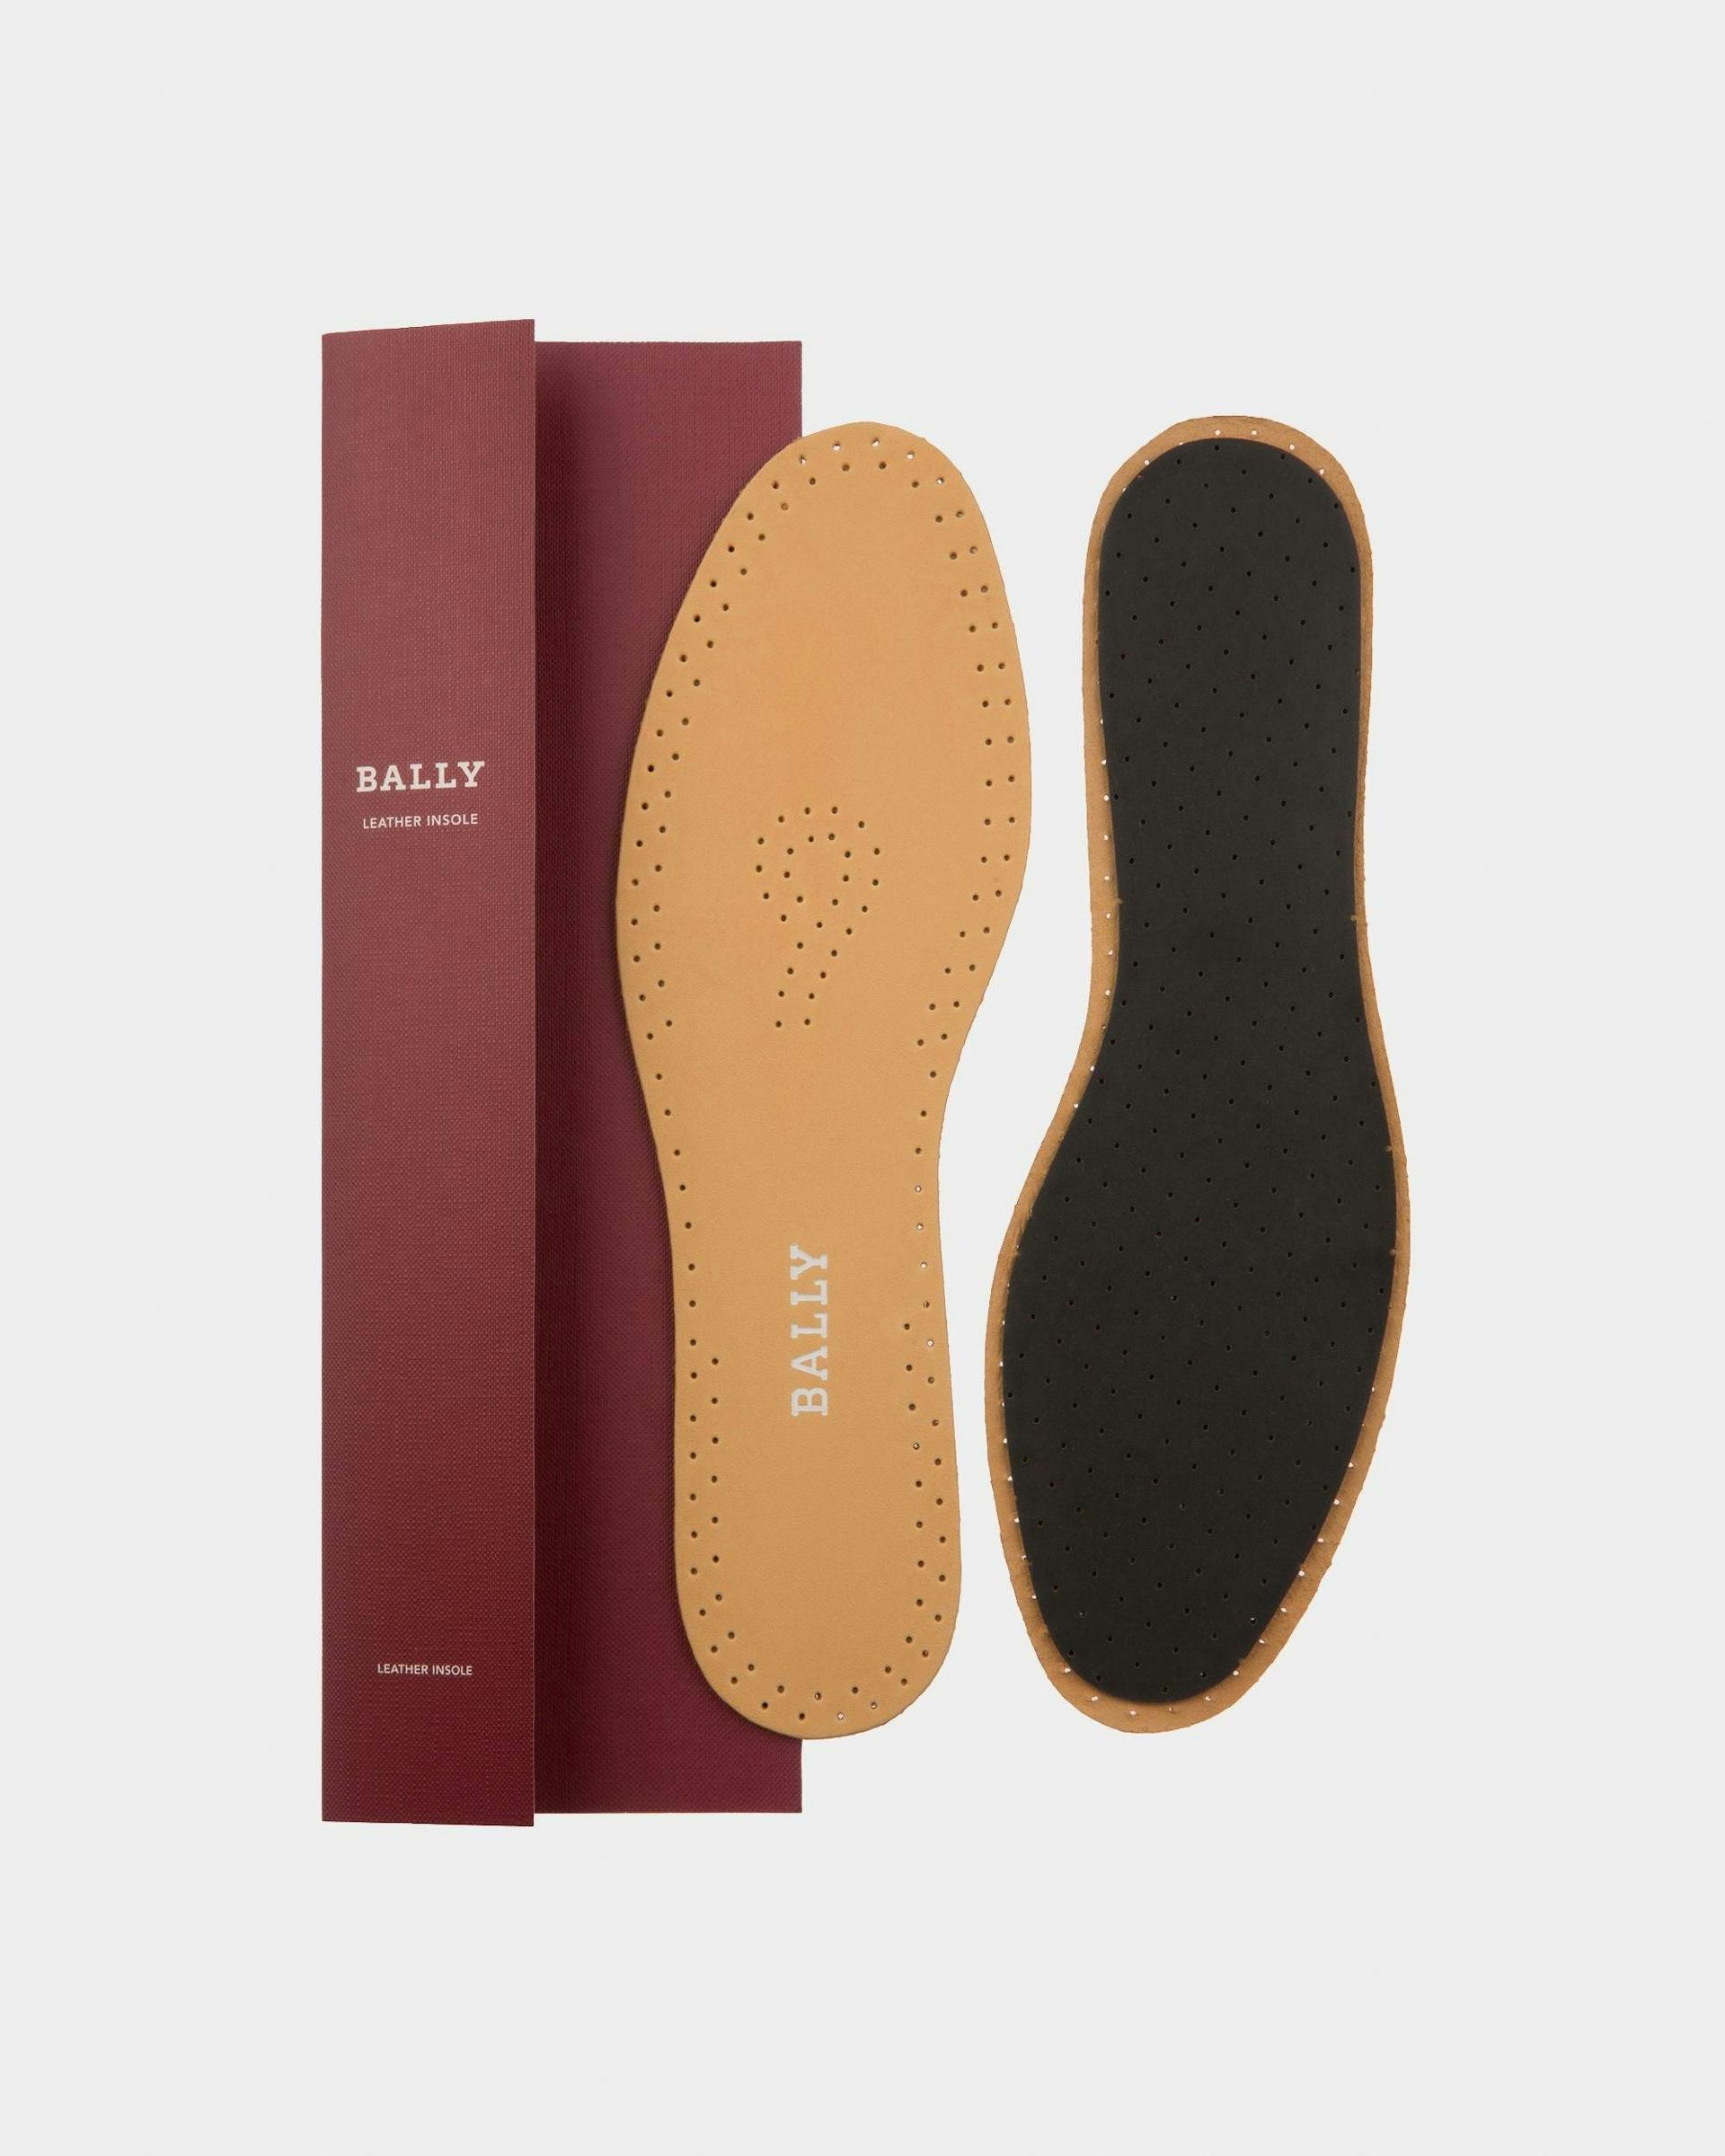 Leather Insole Shoe Care Accessory For All Shoes - Herren - Bally - 01